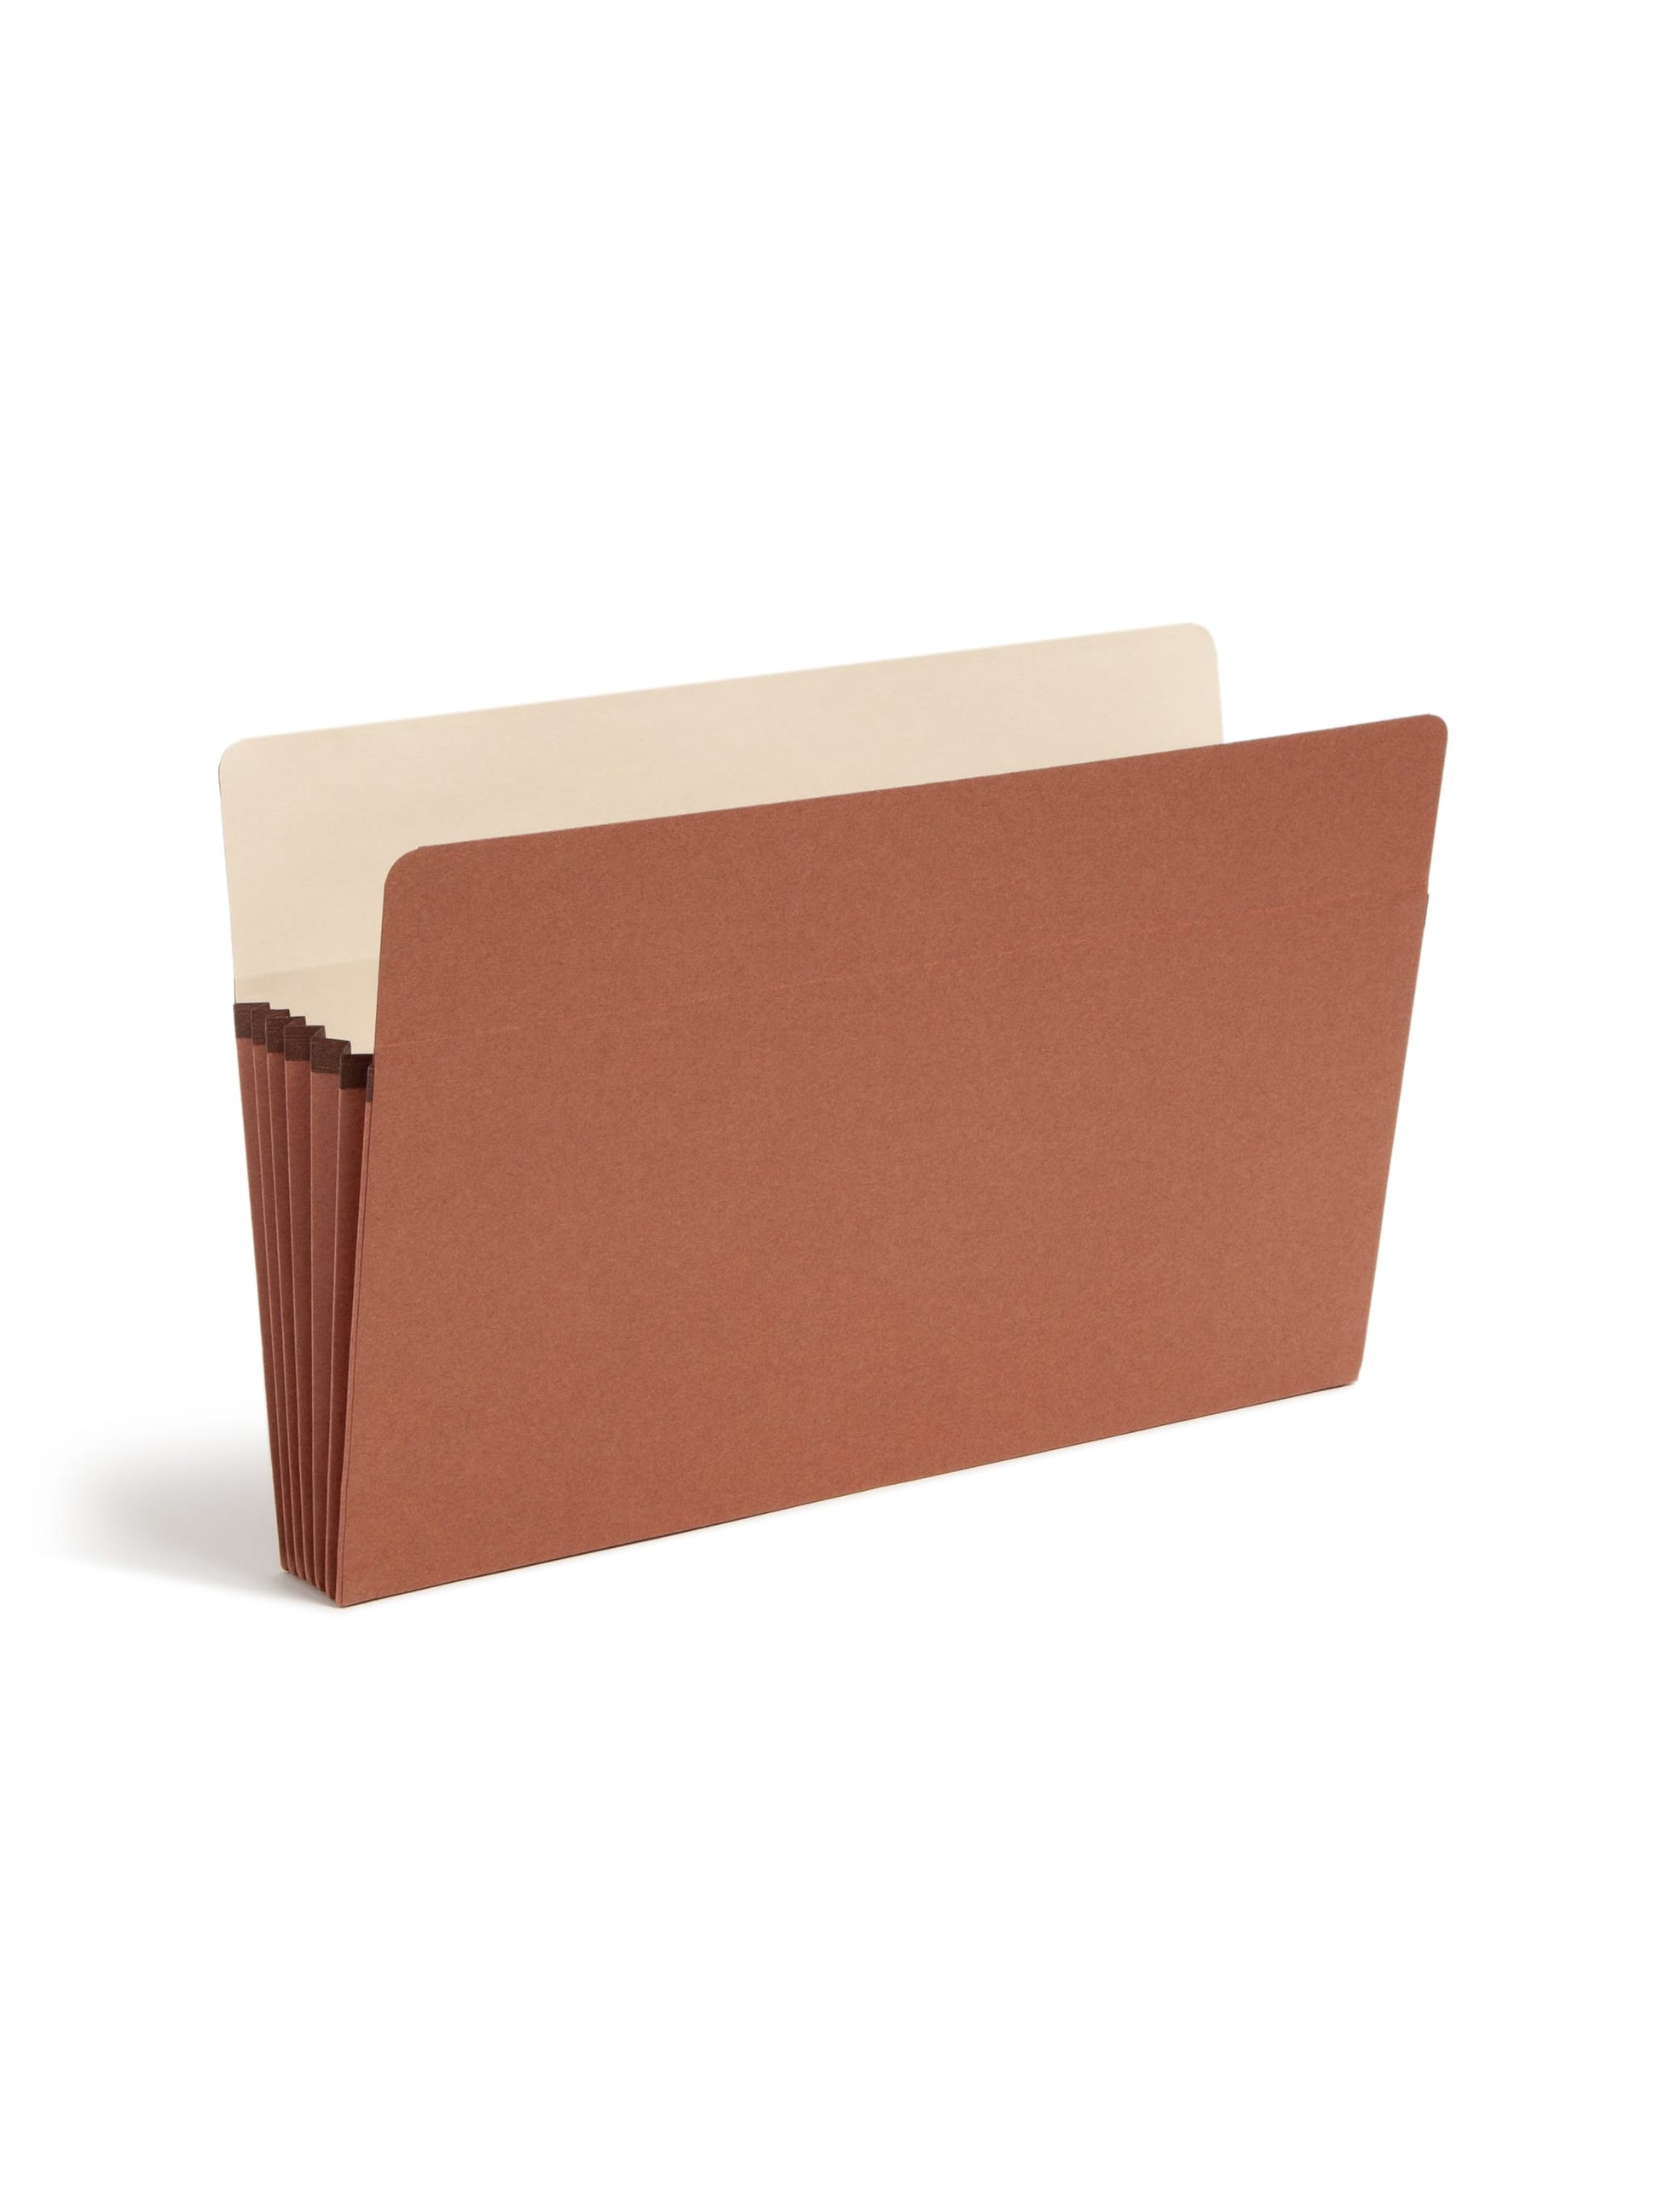 Redrope File Pockets, Straight-Cut Tab, 5-1/4 inch Expansion, Redrope Color, Legal Size, Set of 0, 30086486742345